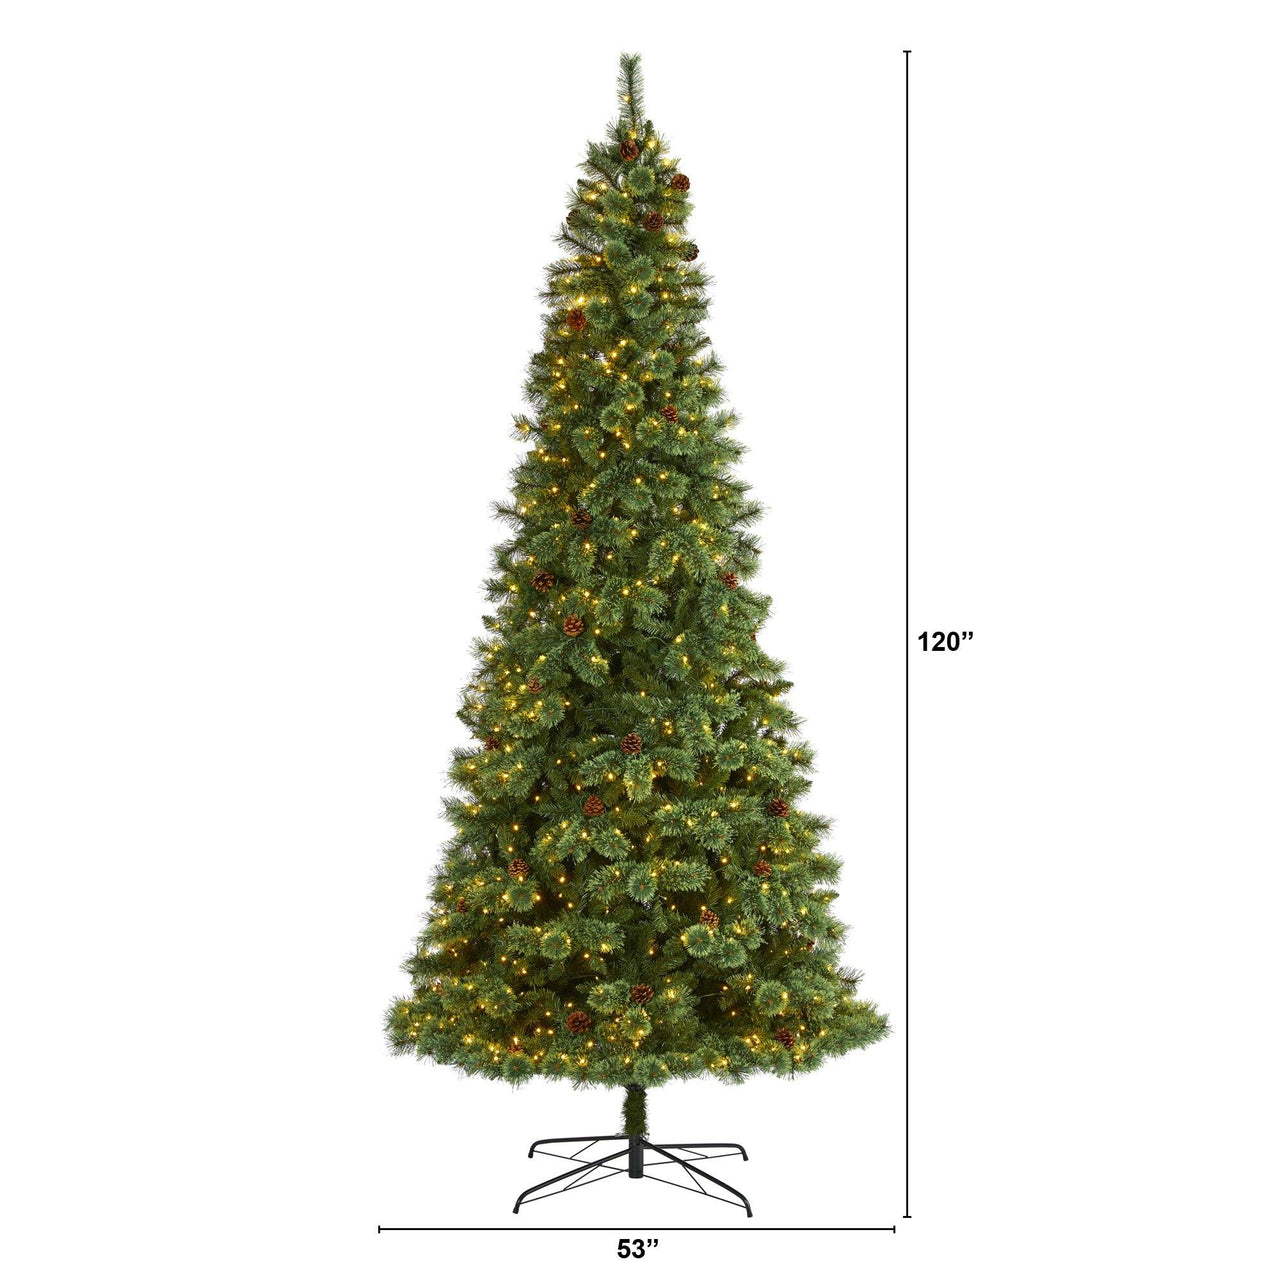 10’ White Mountain Pine Artificial Christmas Tree with 850 Clear LED Lights and Pine Cones - The Fox Decor